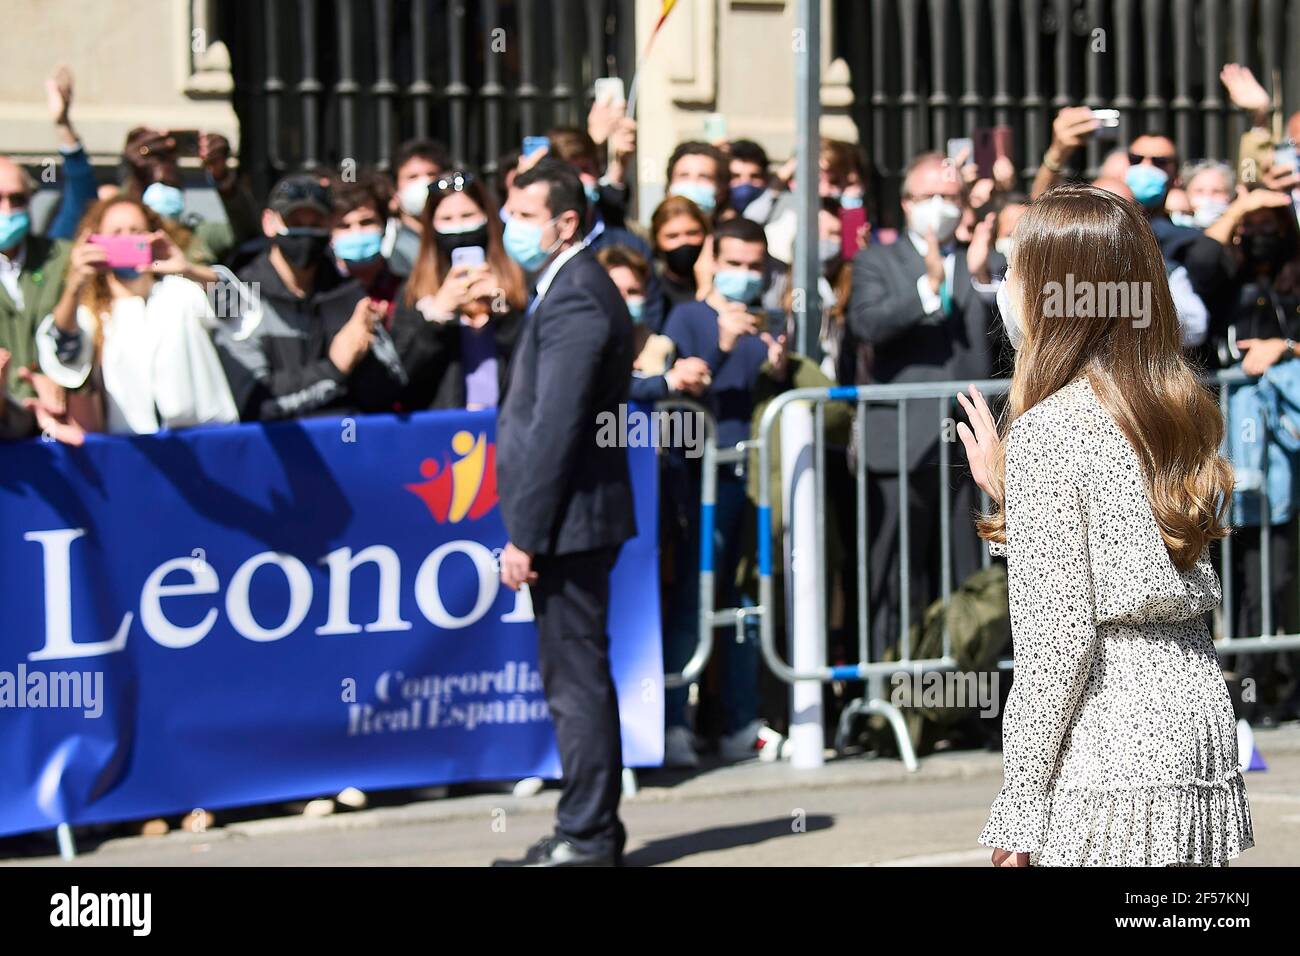 24-03-2021 Spain Princess Leonor, during het 1st solo public event, visited the 30th anniversary of the Cervantes institute. Princess Leonor, 15, visited the Cervantes Institute where she will deposit the Cervantes and Spanish Constitution copies that she used to read in her two first public readings.      (Photo by Thorton/PPE/Sipa USA) Stock Photo